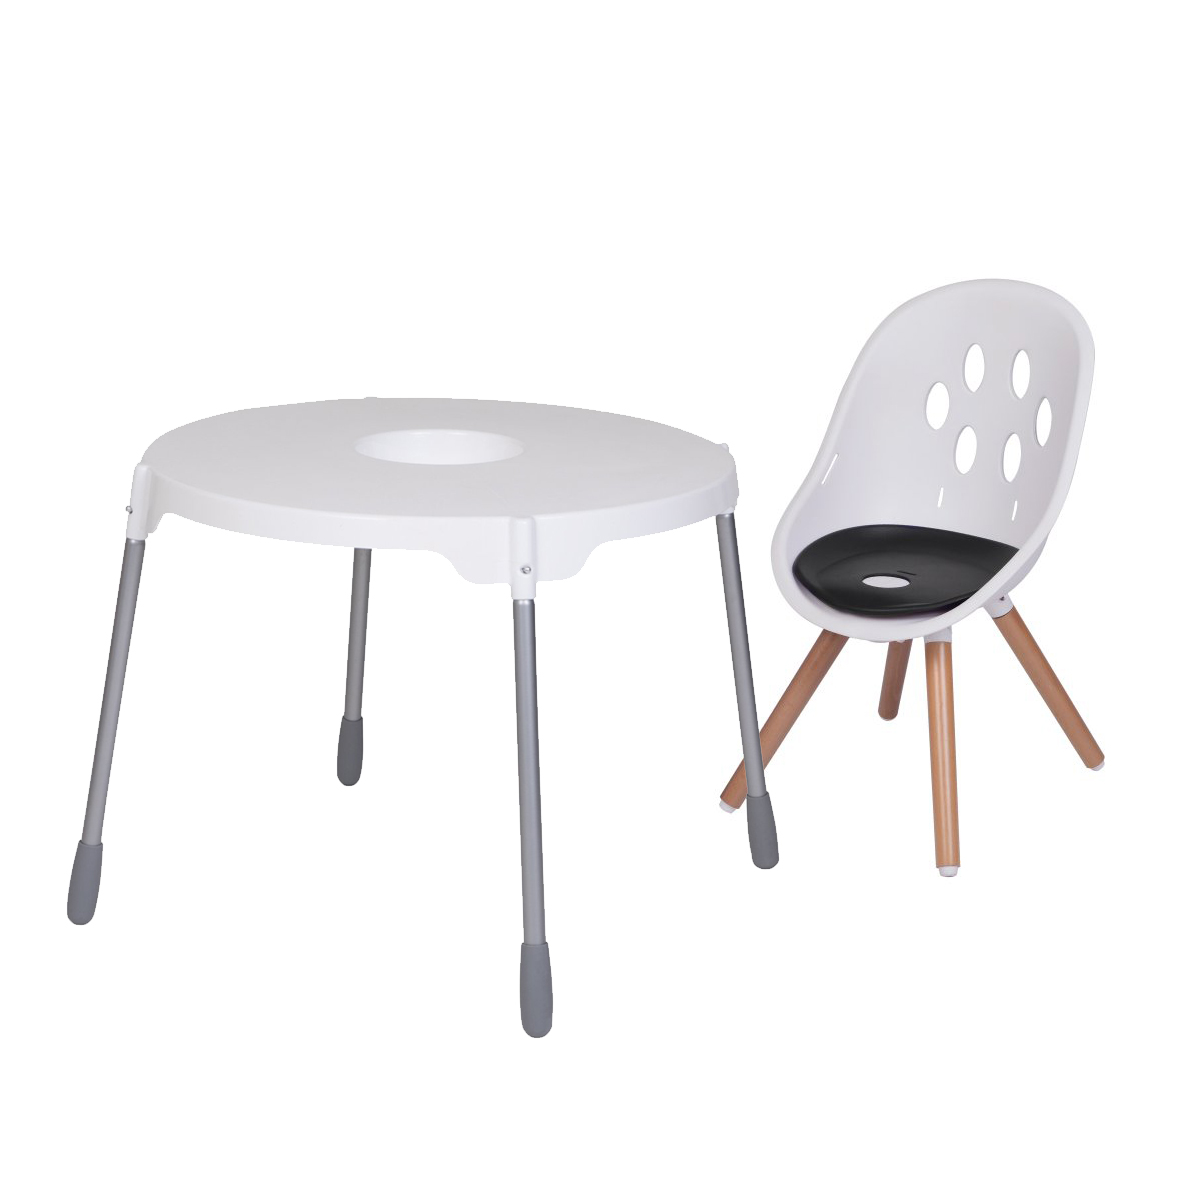 https://cdn.accentuate.io/4711297450089/19119322628201/phil_and_teds_poppy_wood_leg_high_chair_to_my_chair_dual_modes_1_combo-v1630981622100.jpg?1200x1200